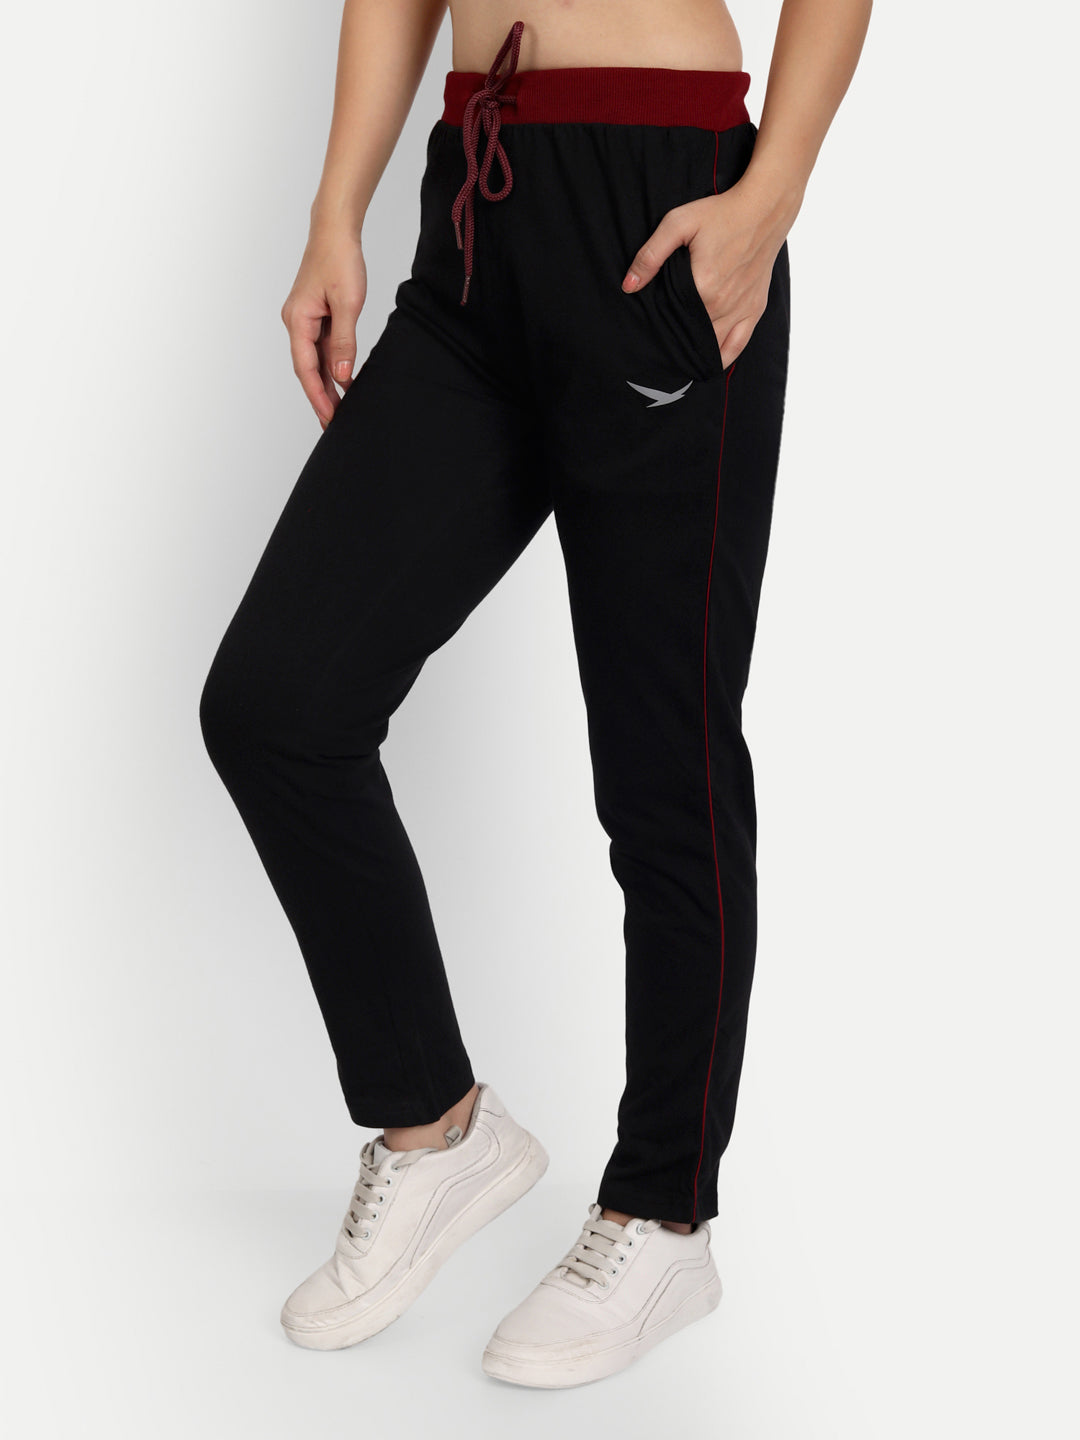 Showoff Women Track Pants at Lowest Price in India|Free Shipping| COD